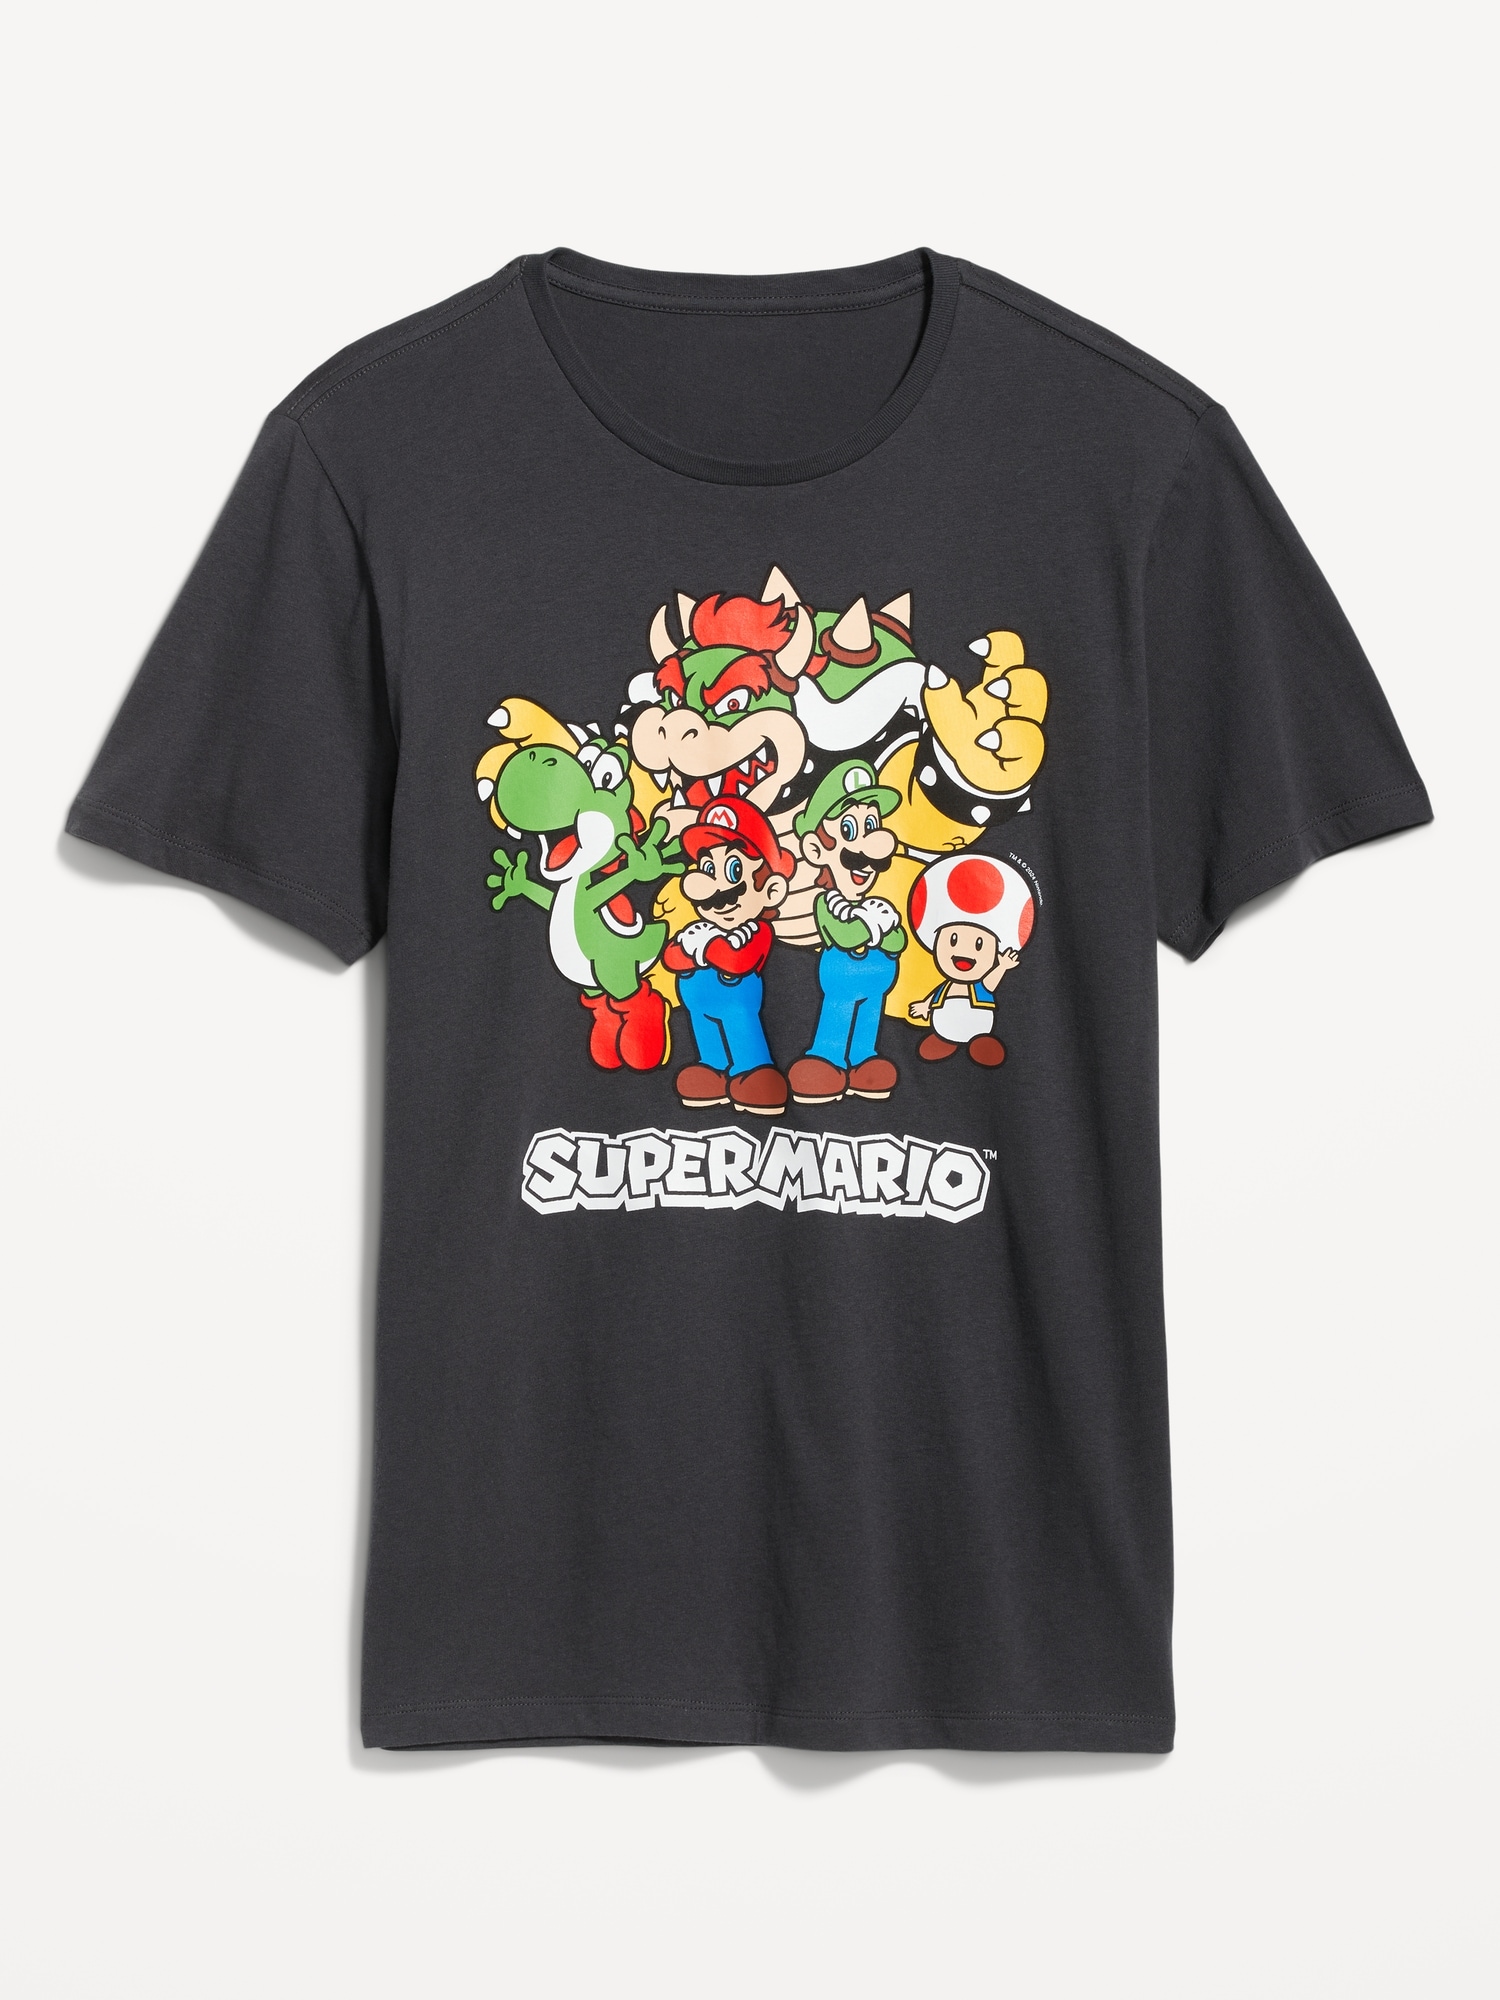 Super Mario Bros.™ Gender-Neutral Graphic T-Shirt for Adults